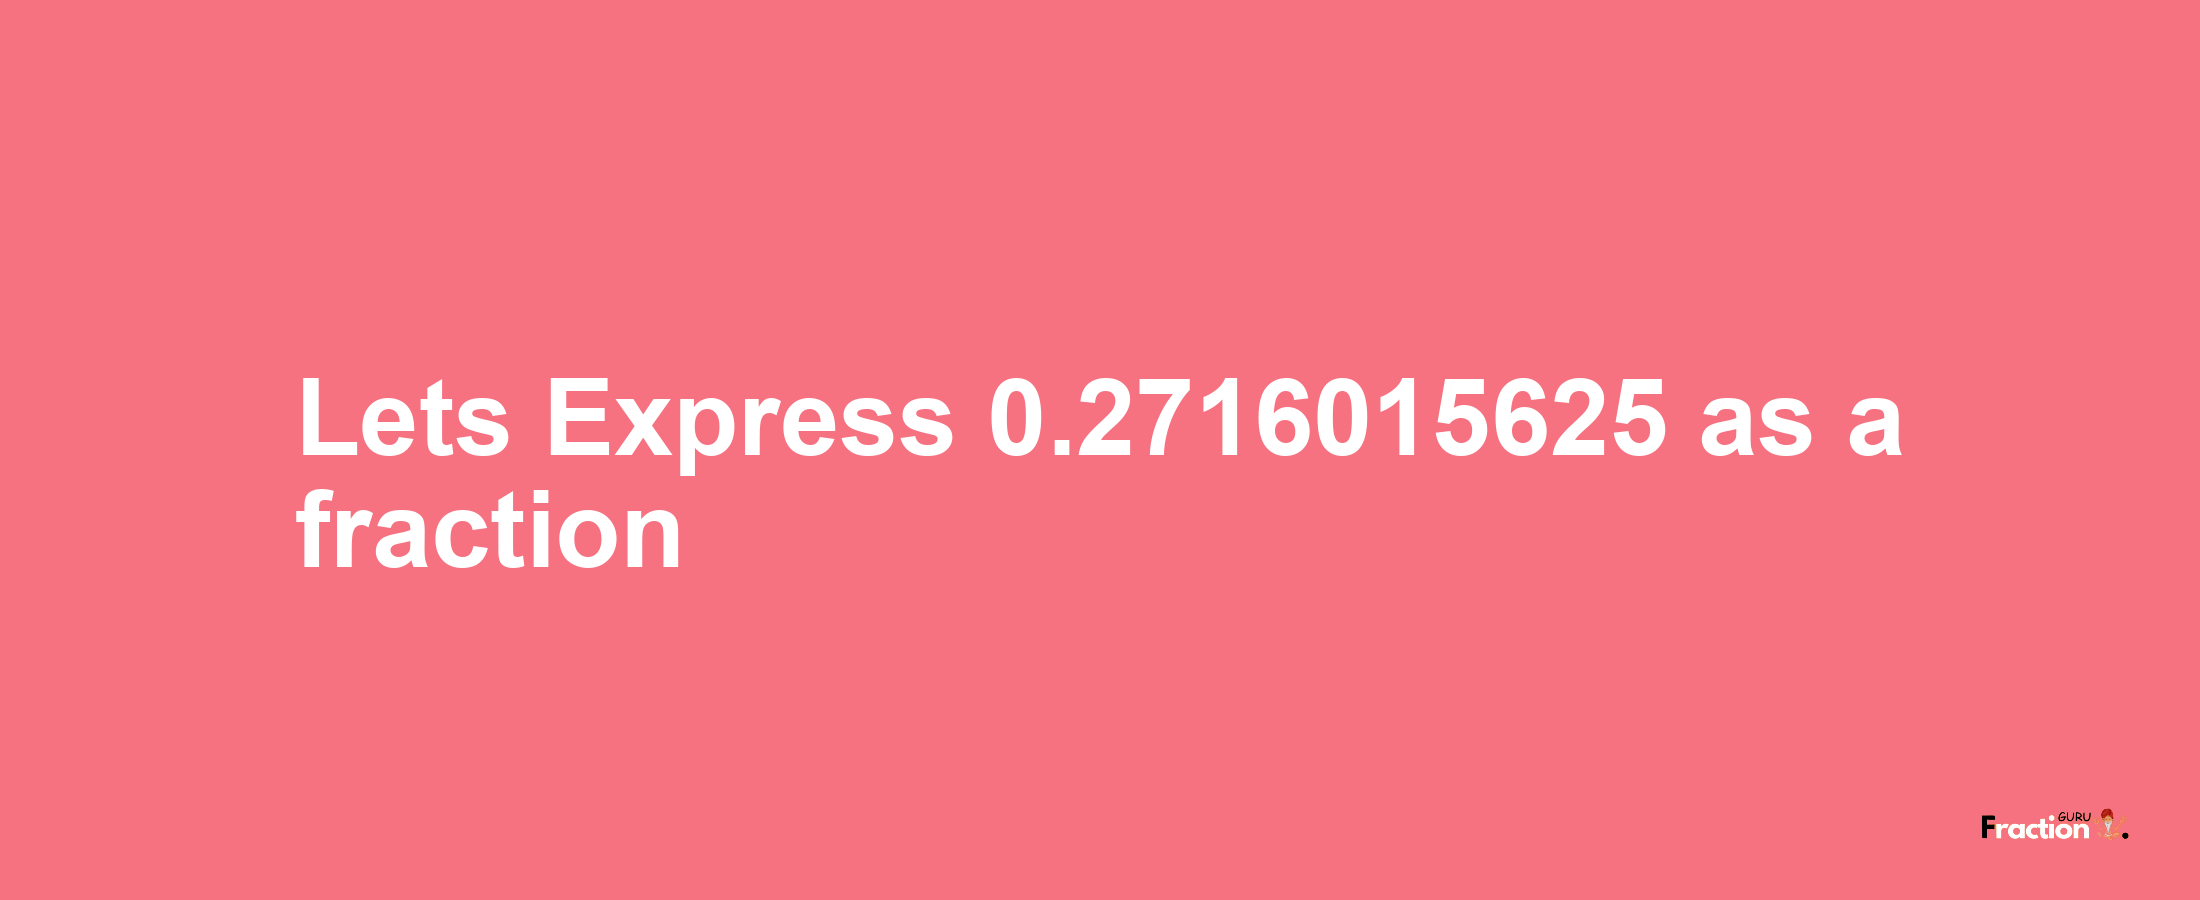 Lets Express 0.2716015625 as afraction